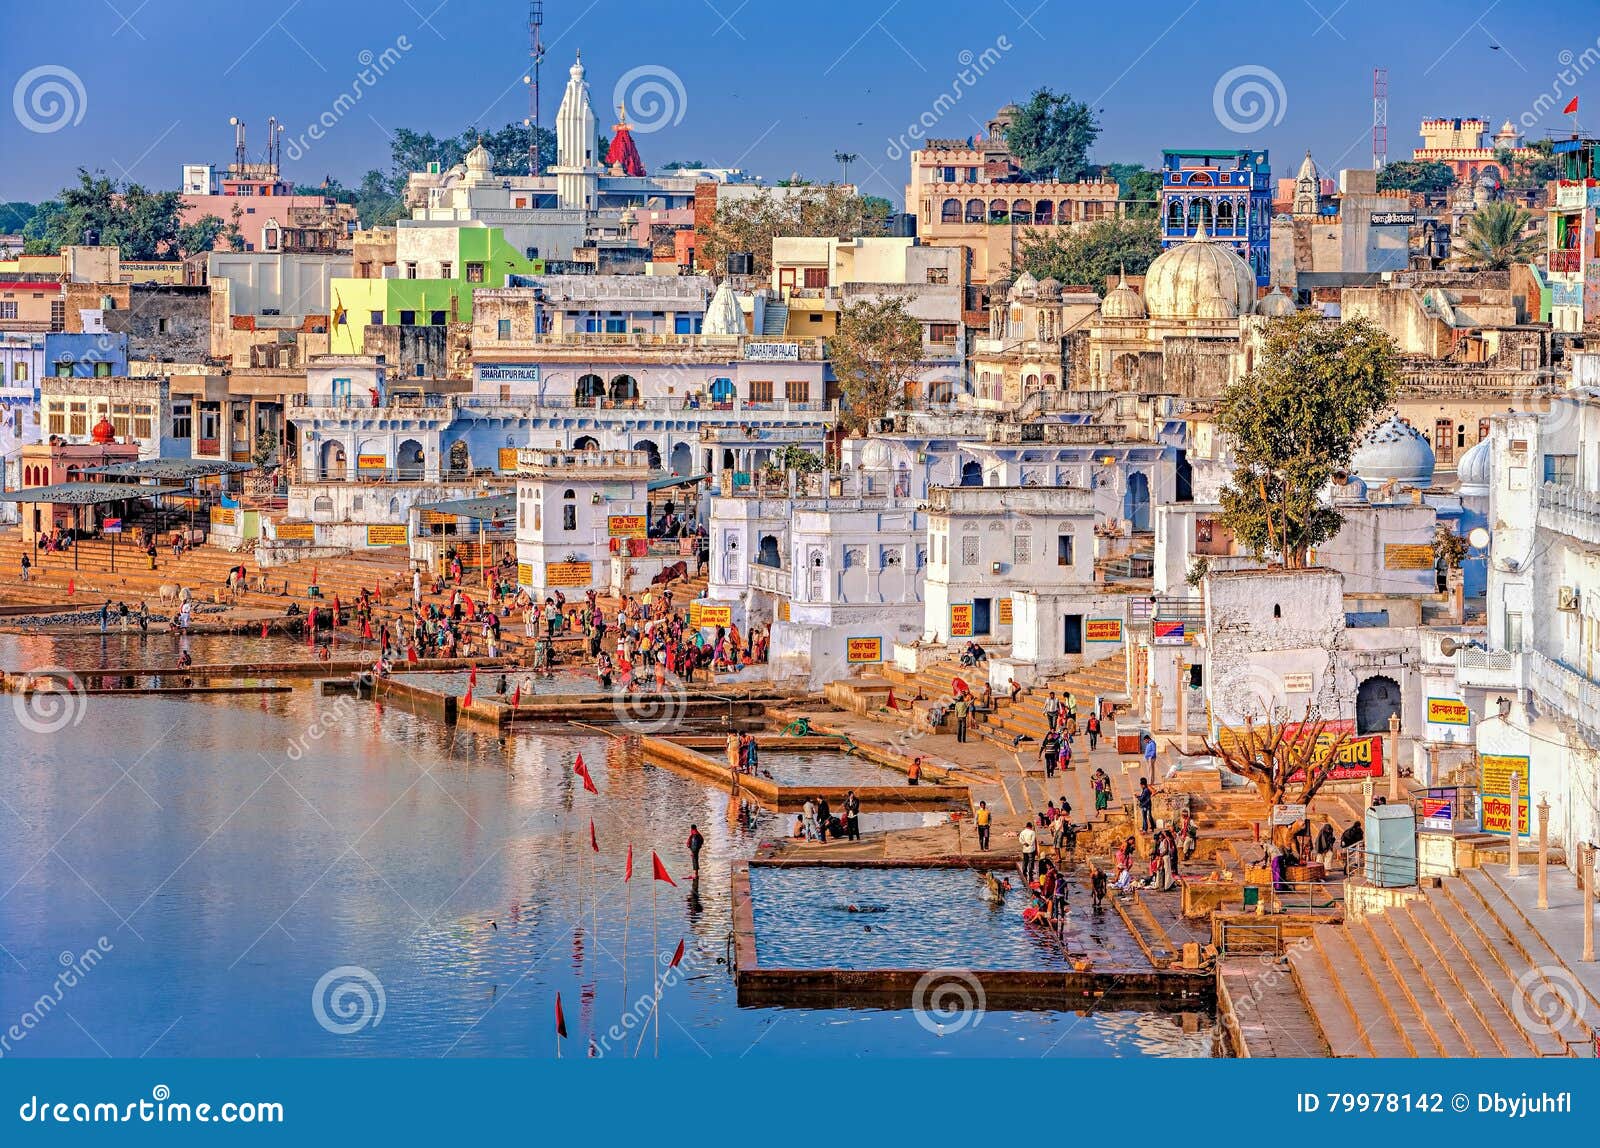 Premium Photo | The holy brahman town and lake in the early morning, pushkar, rajasthan, india.